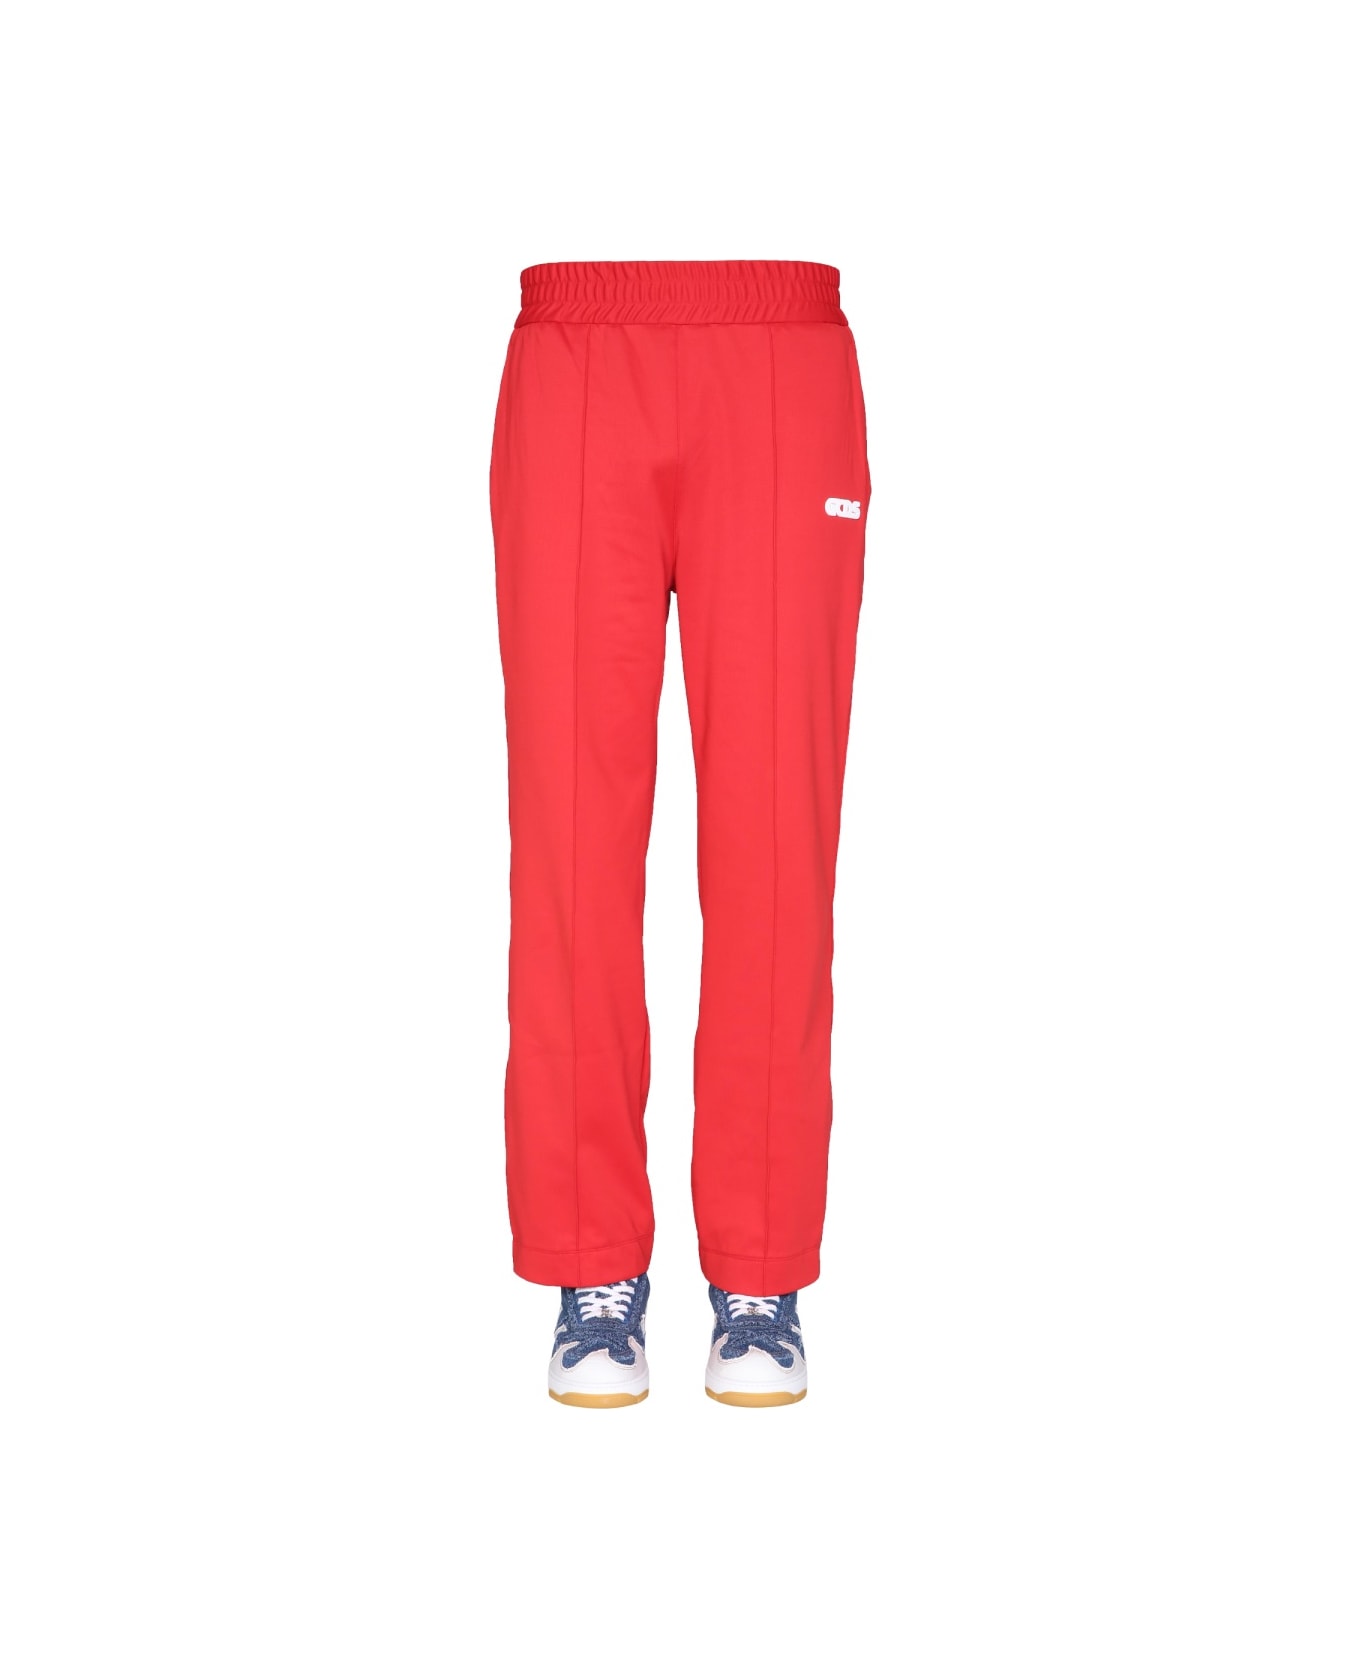 GCDS Jogging Pants With "chain" Print - RED